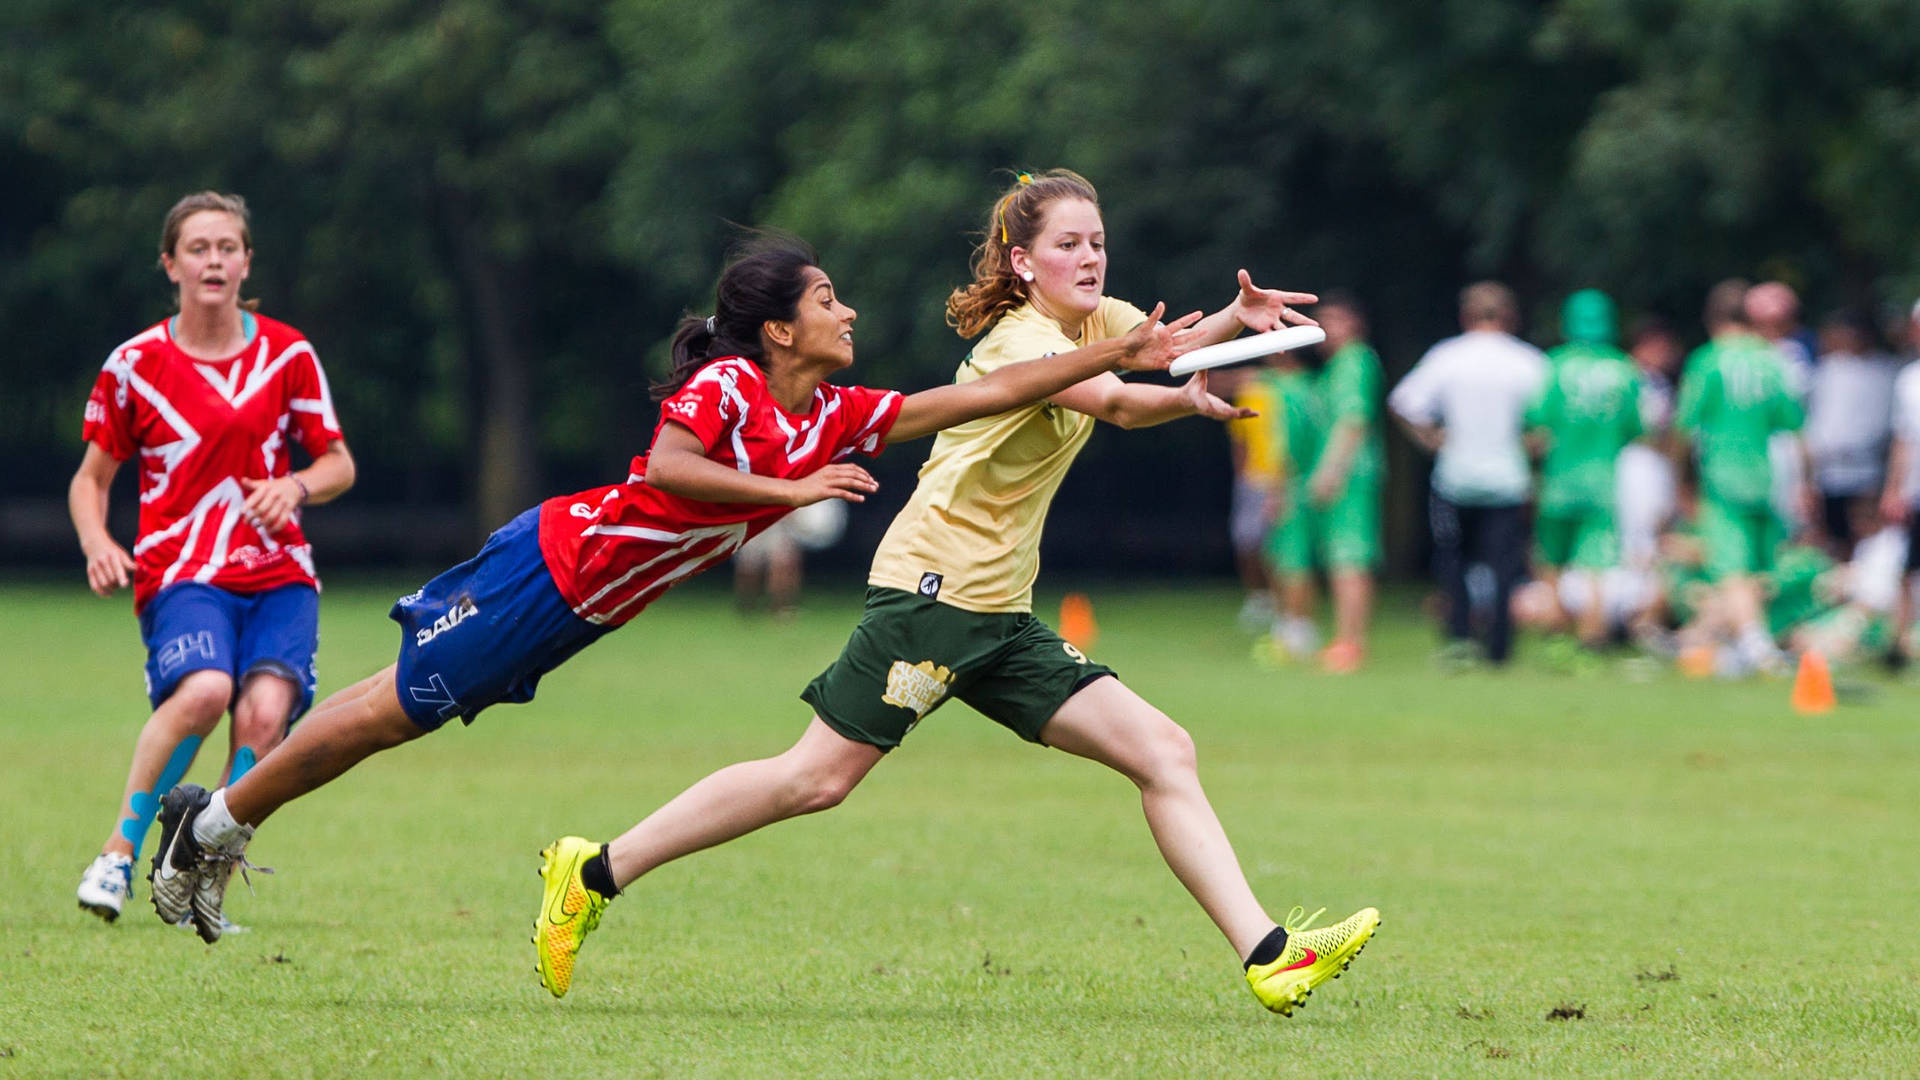 Ultimate Frisbee 2560X1440 Wallpaper and Background Image